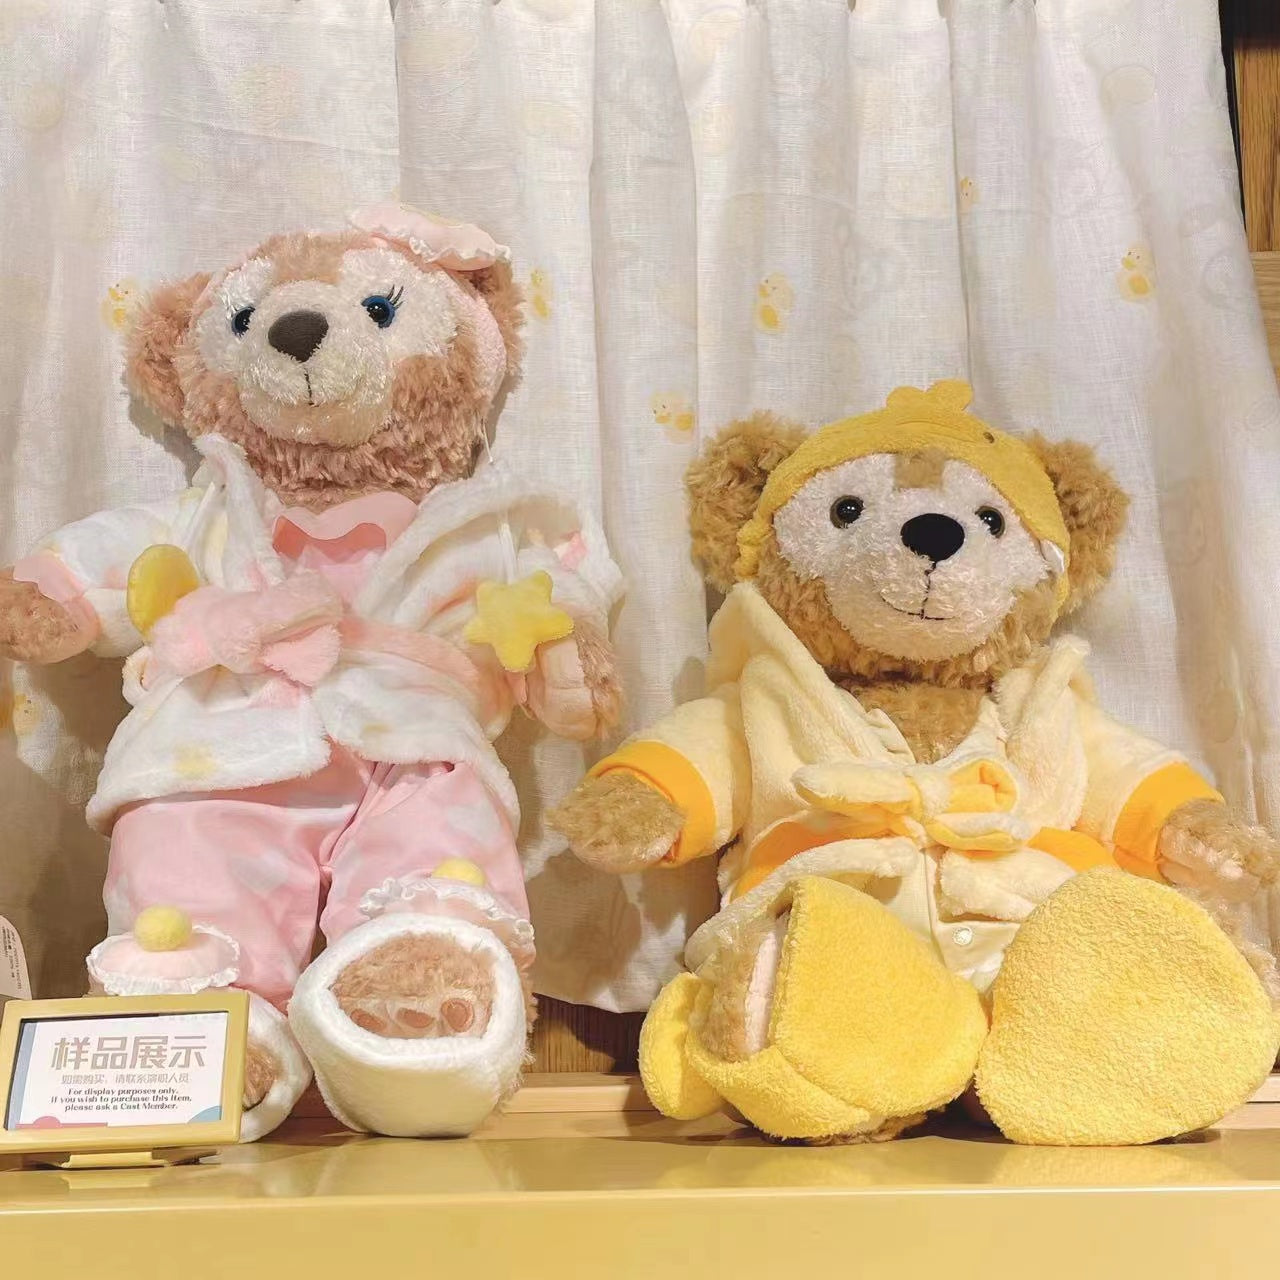 SHDL - Duffy and friends collection - Duffy plush outfit